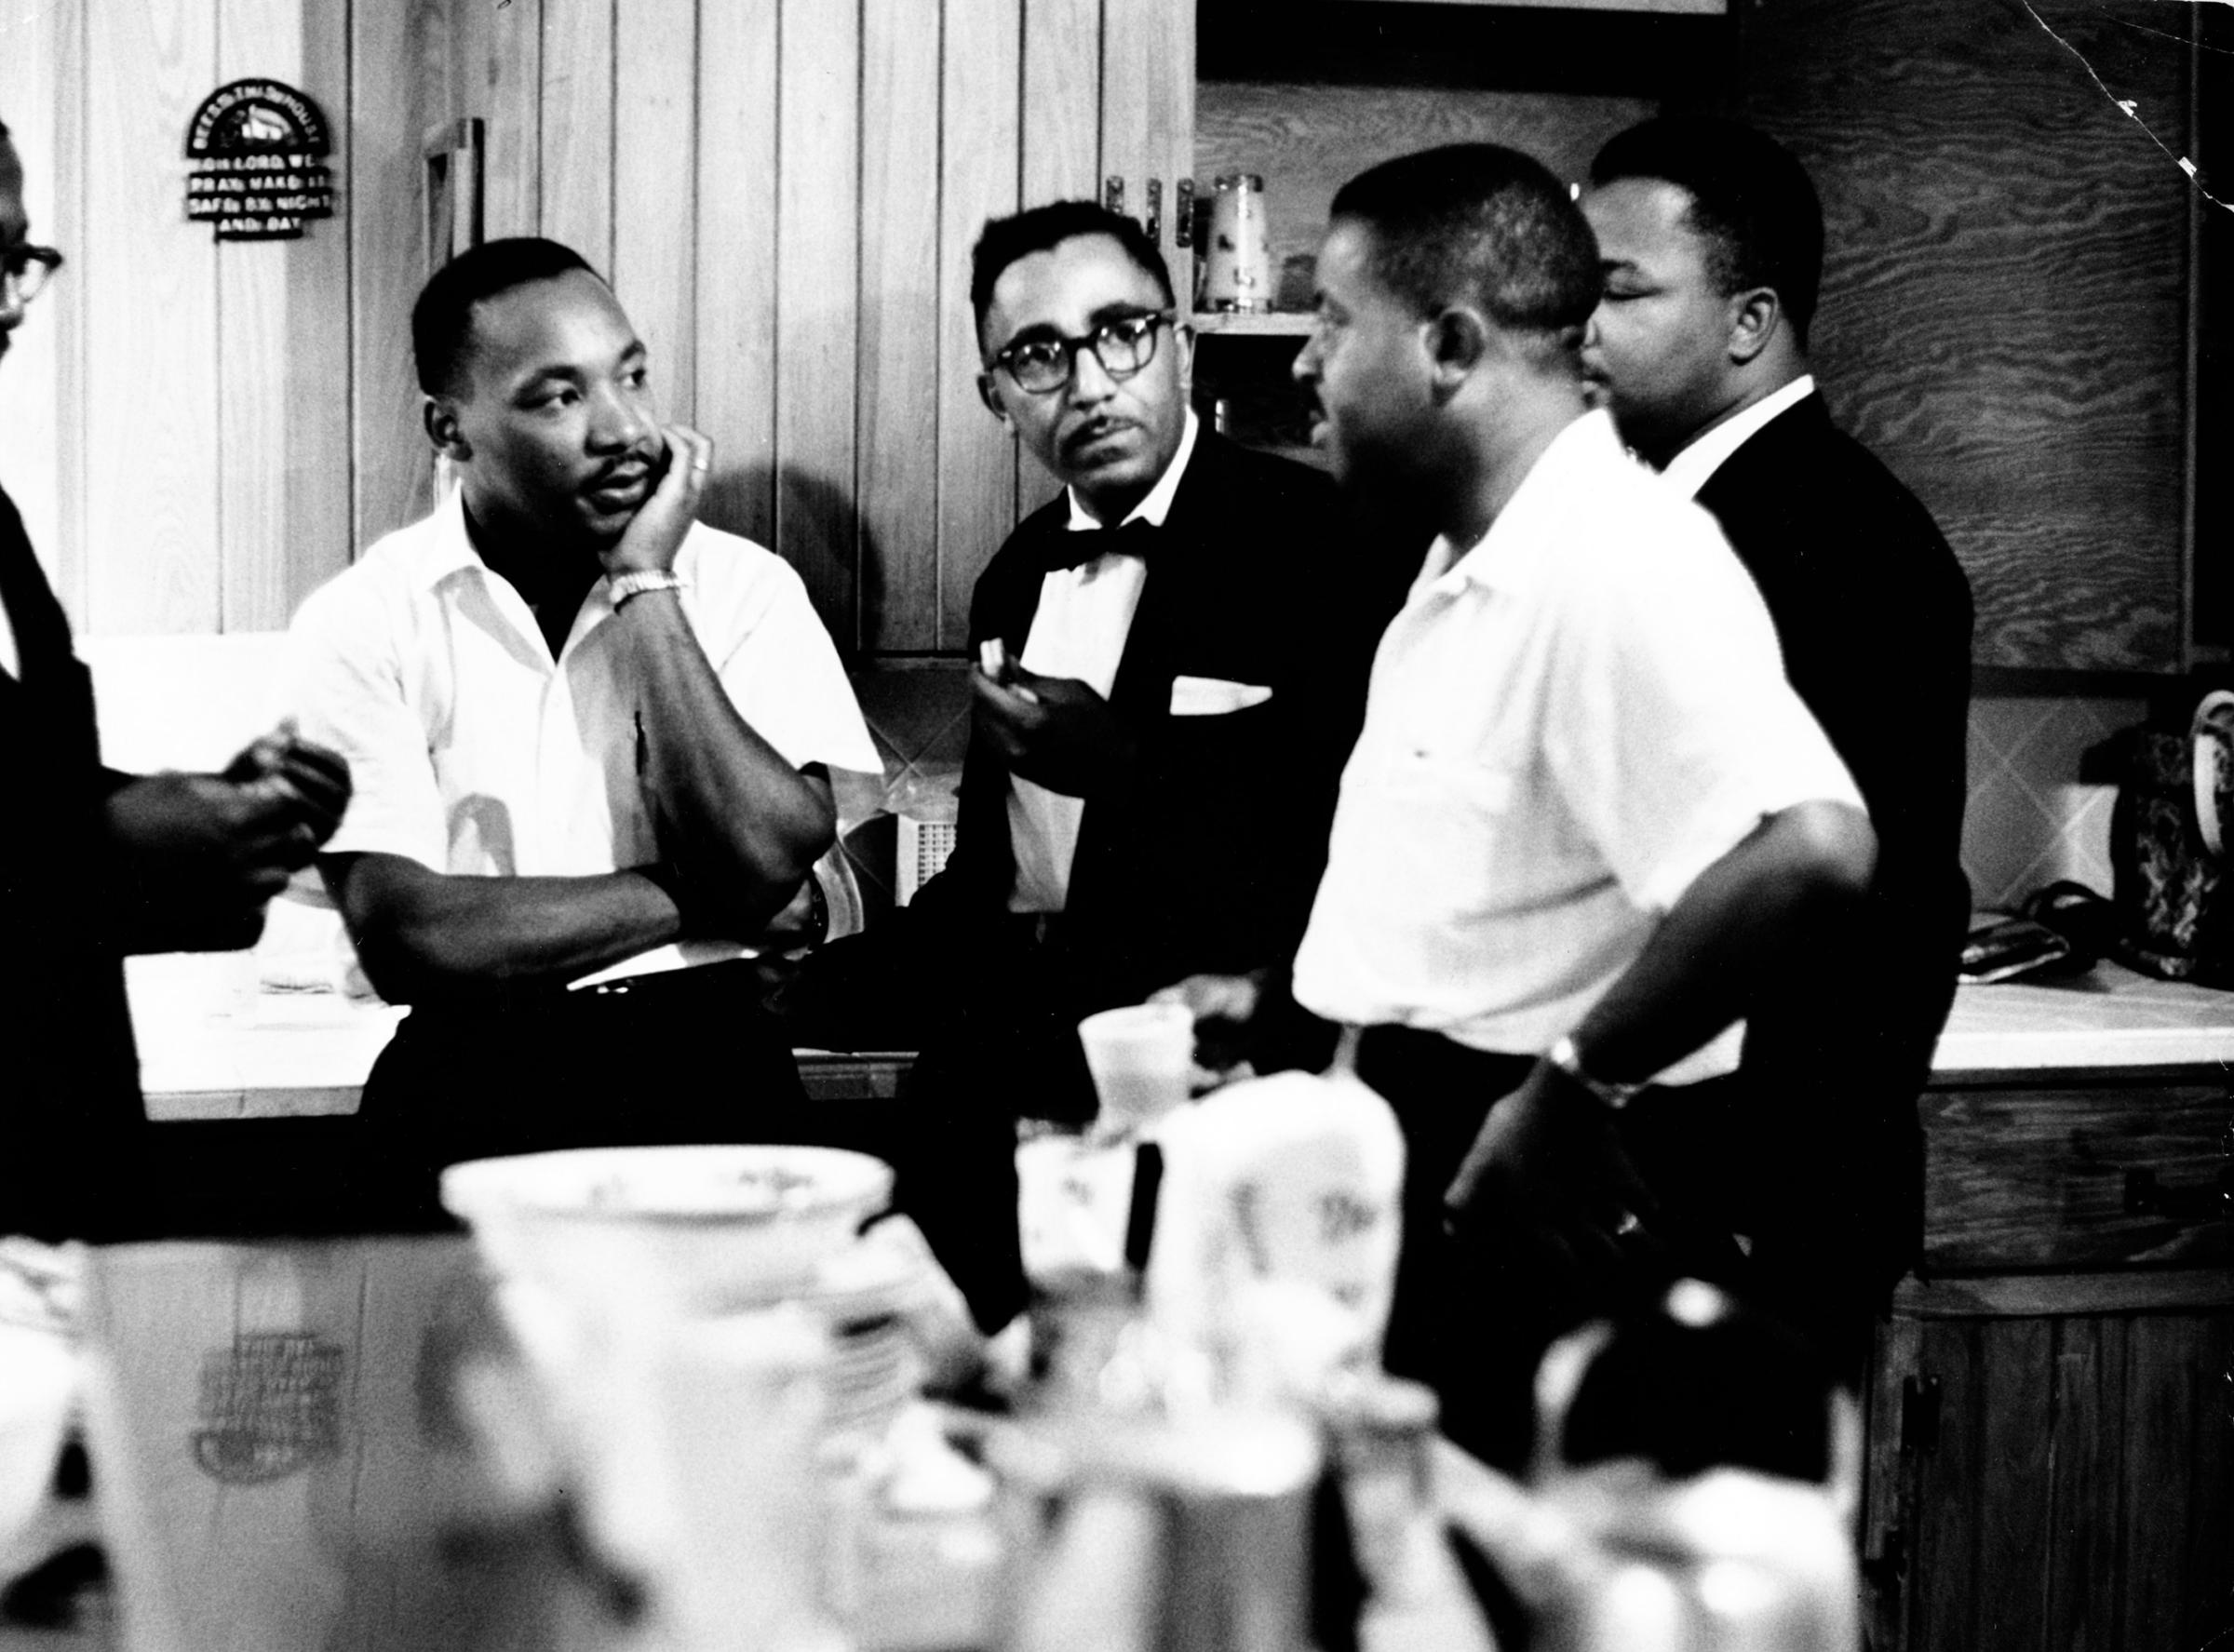 Rev. Martin Luther King Jr. (C) speaking with Rev. Ralph Abernathy (2nd R) and others, 1961.